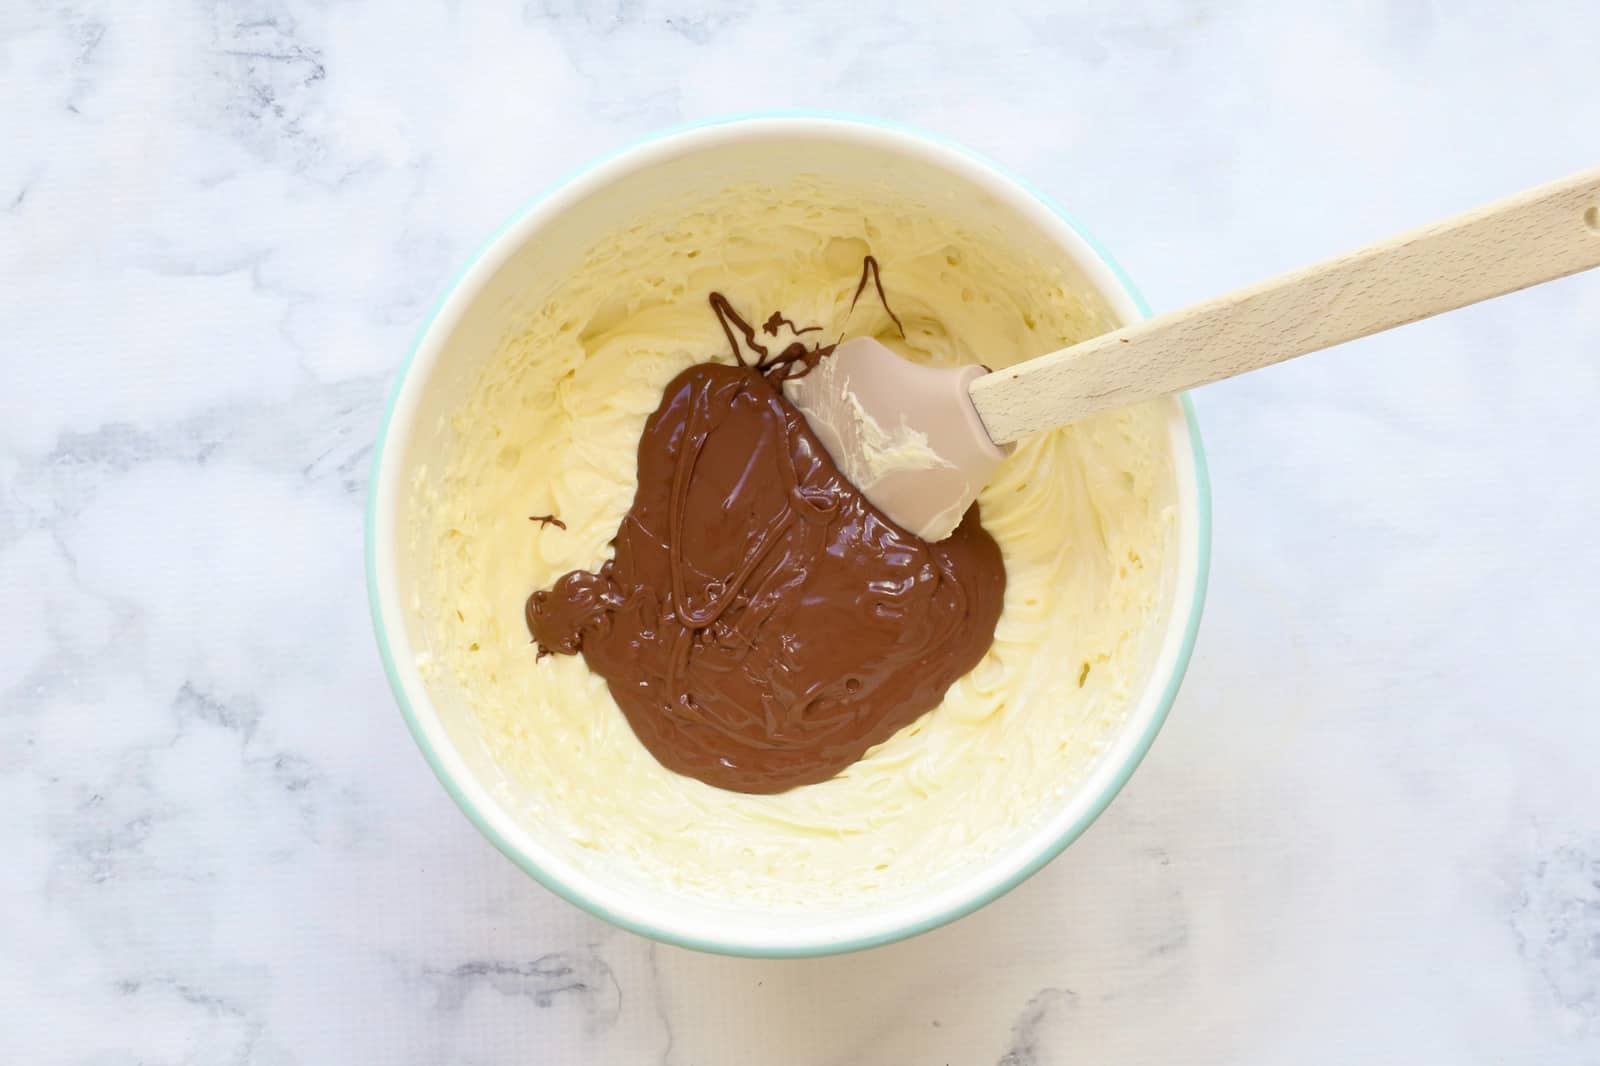 Milk chocolate on top of cream cheese mixture in a bowl.